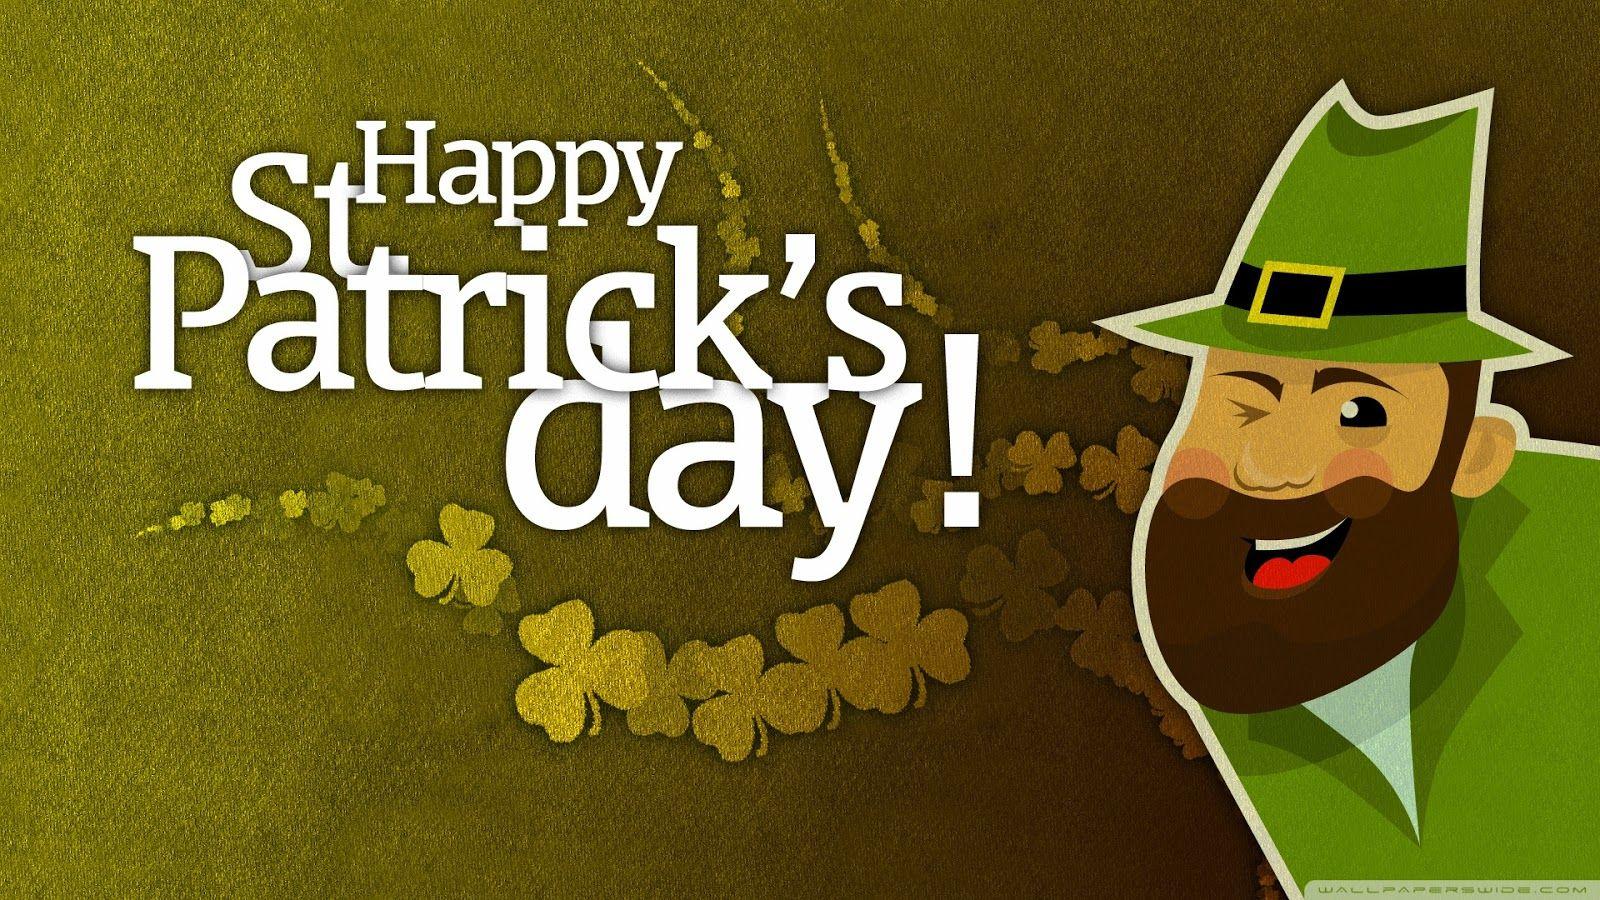 Happy St Patricks Day 2018 Wallpaper Free download. St Paddy Day